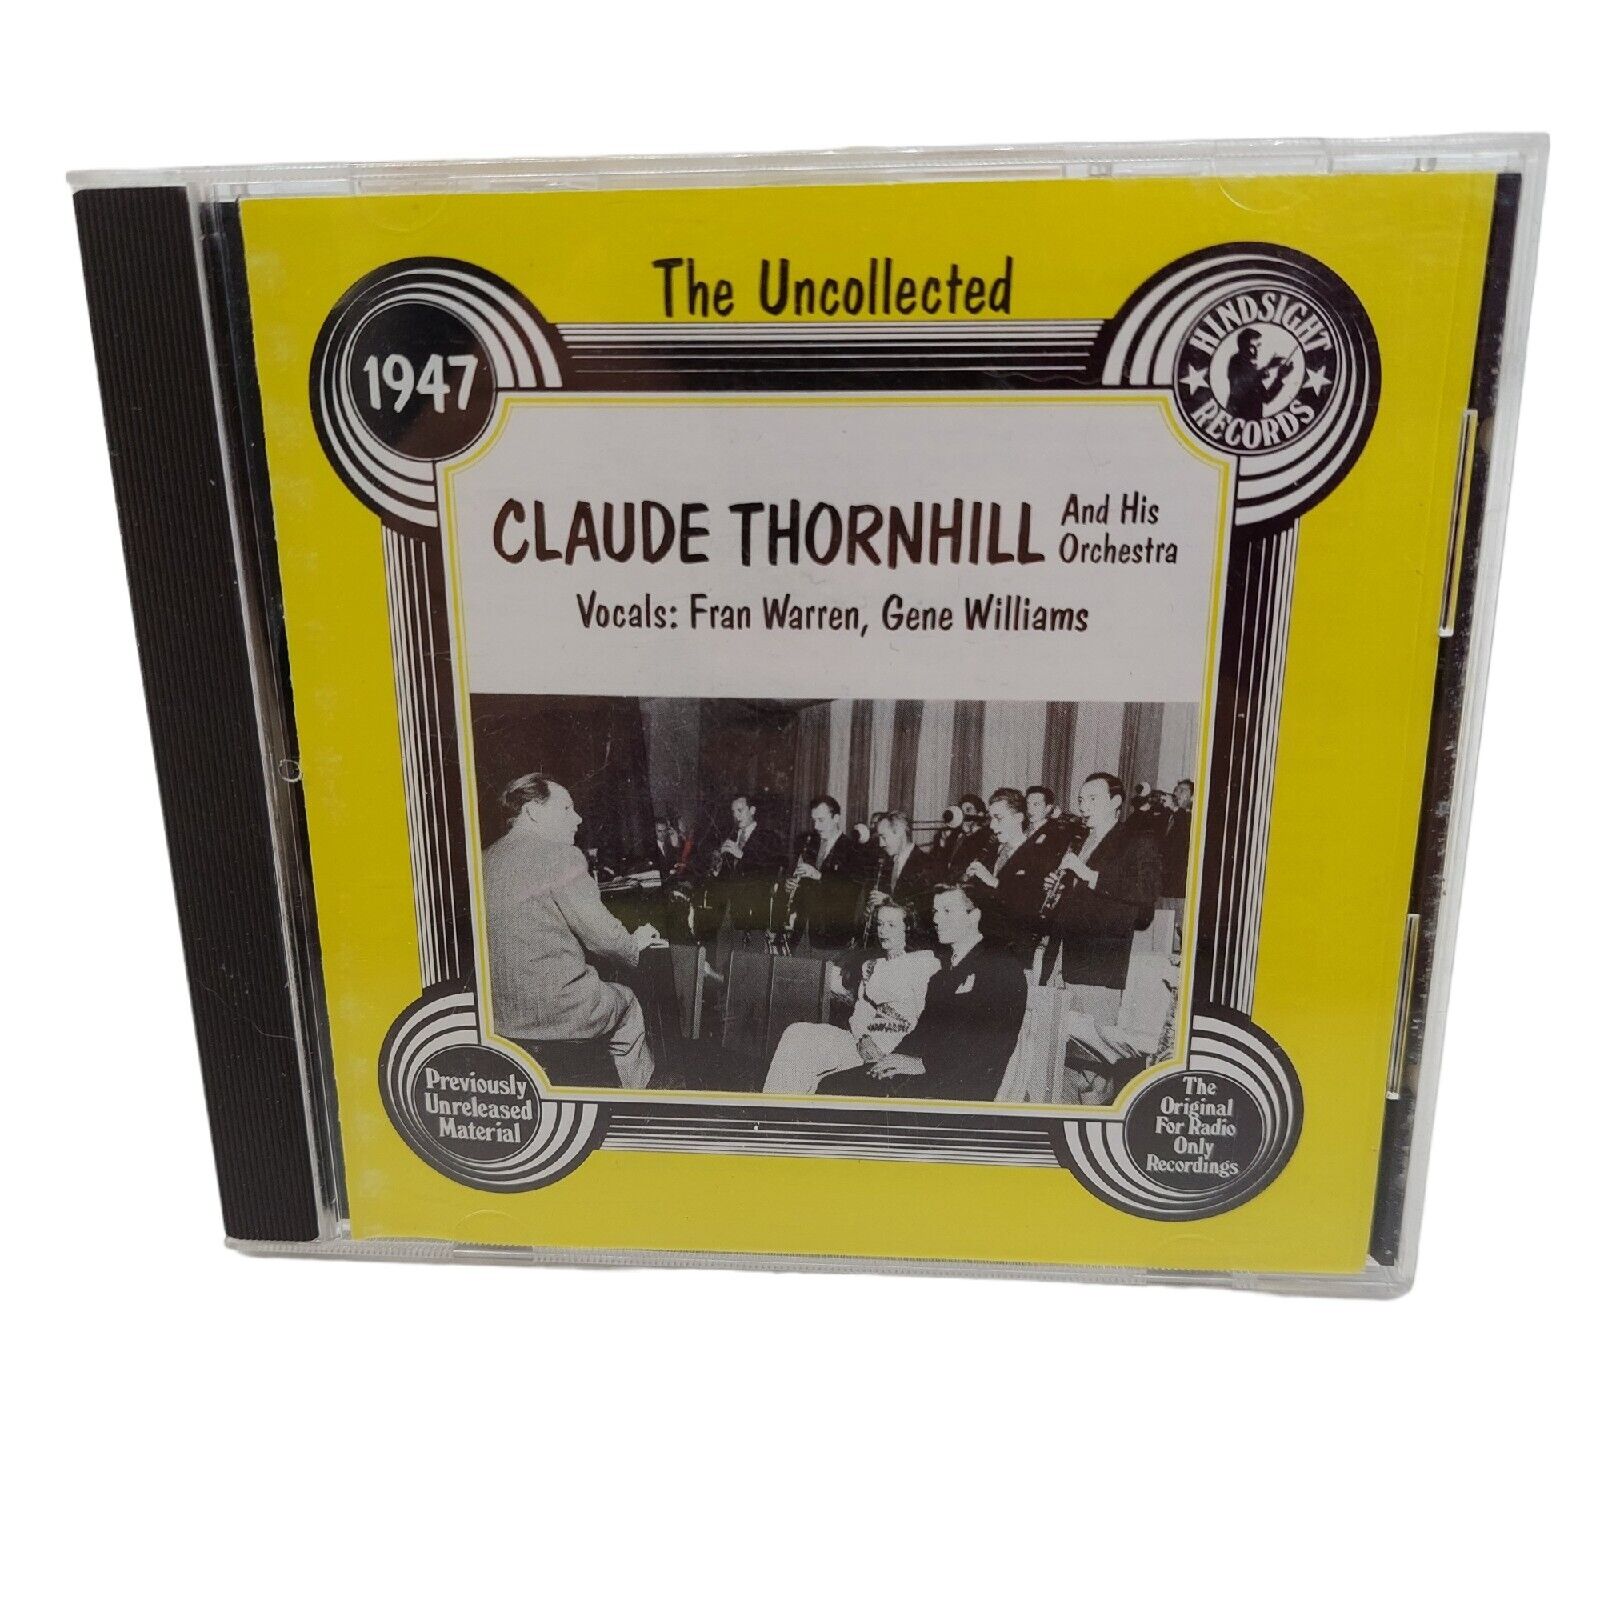 CLAUDE THORNHILL The Uncollected Claude Thornhill CD